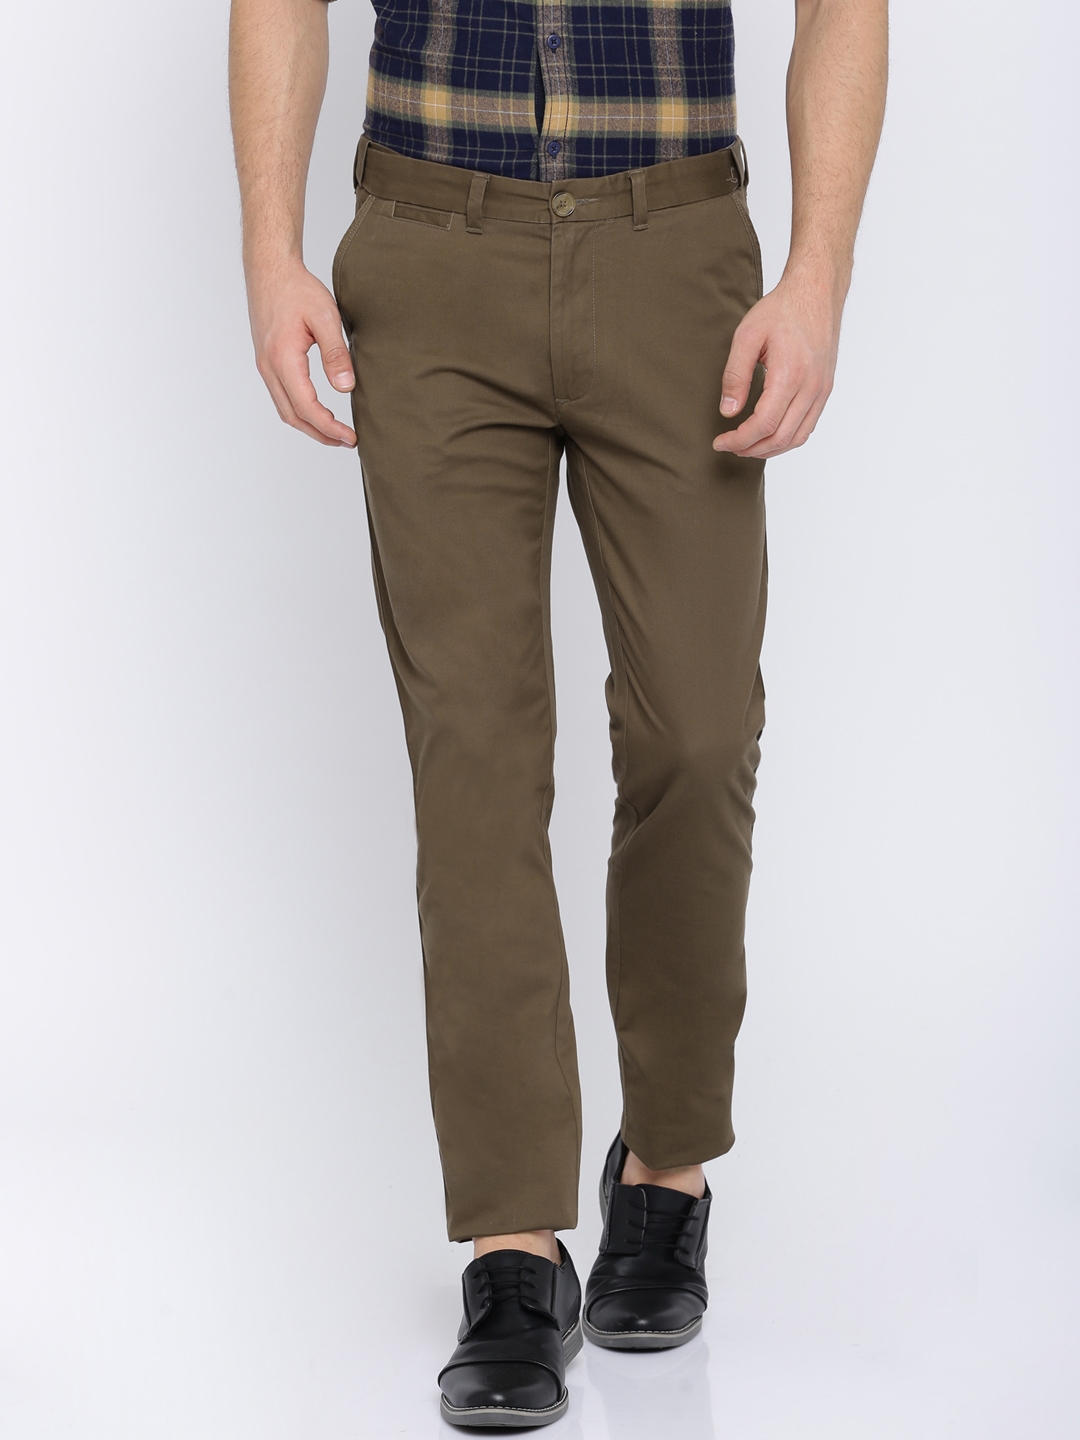 Peter England Casuals Trousers & Chinos, Peter England Cream Formal Trousers  for Men at Peterengland.com